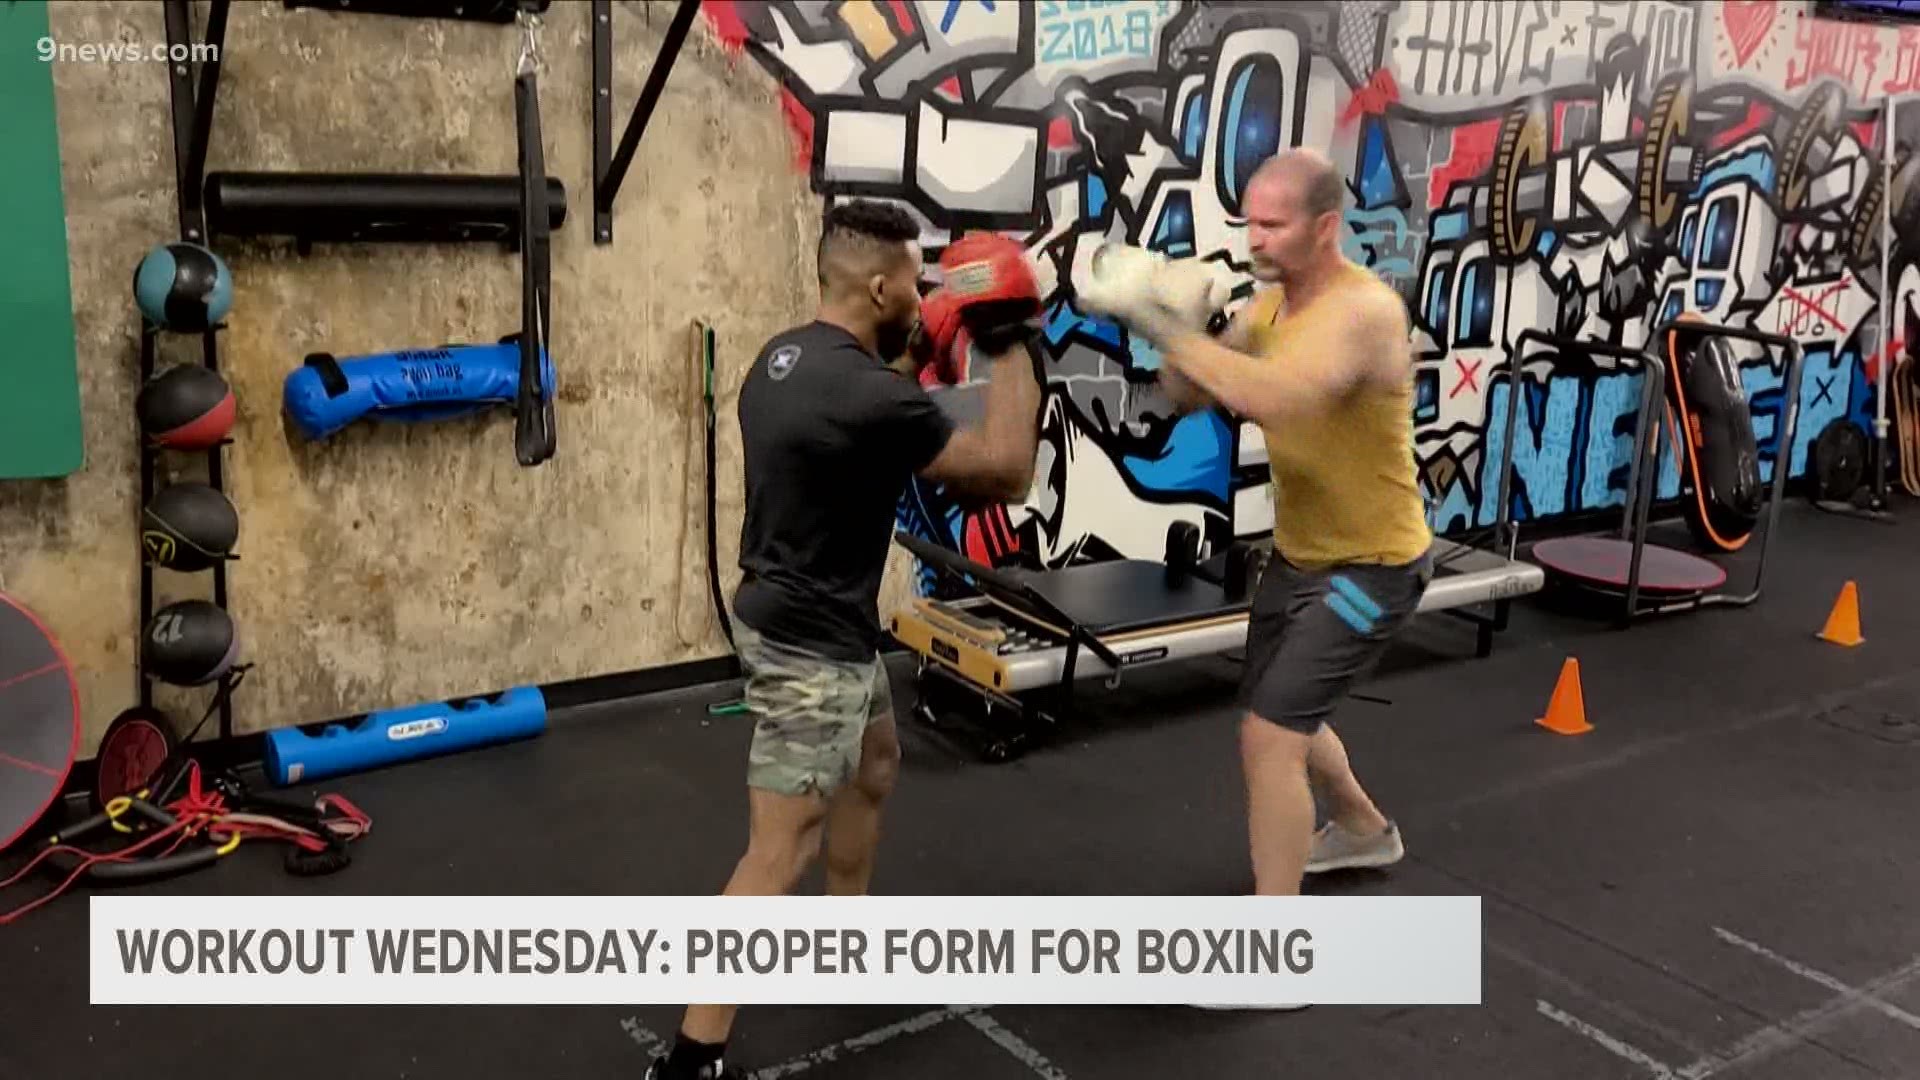 Grab those boxing gloves and get ready to break a sweat. In today's Workout Wednesday, we learn all about proper form to maximize a boxing workout.